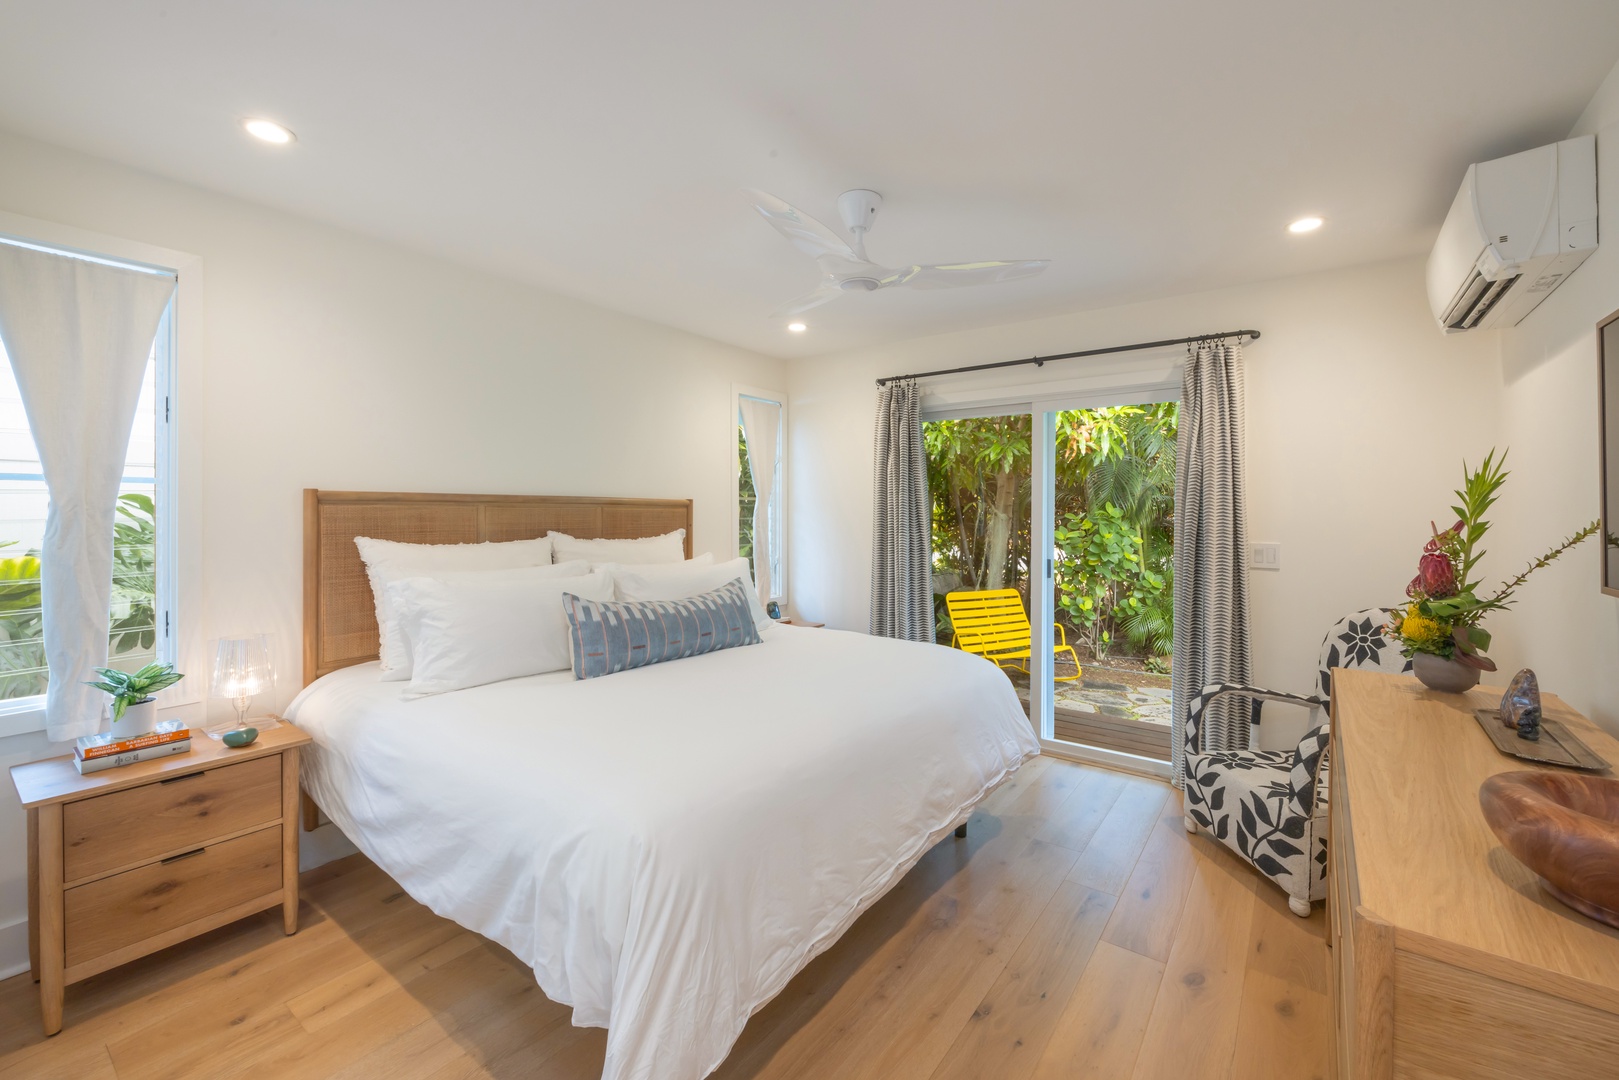 Kailua Vacation Rentals, Lanikai Ola Nani - Experience luxury in our primary suite, complete with a plush king bed and access to private seating area.